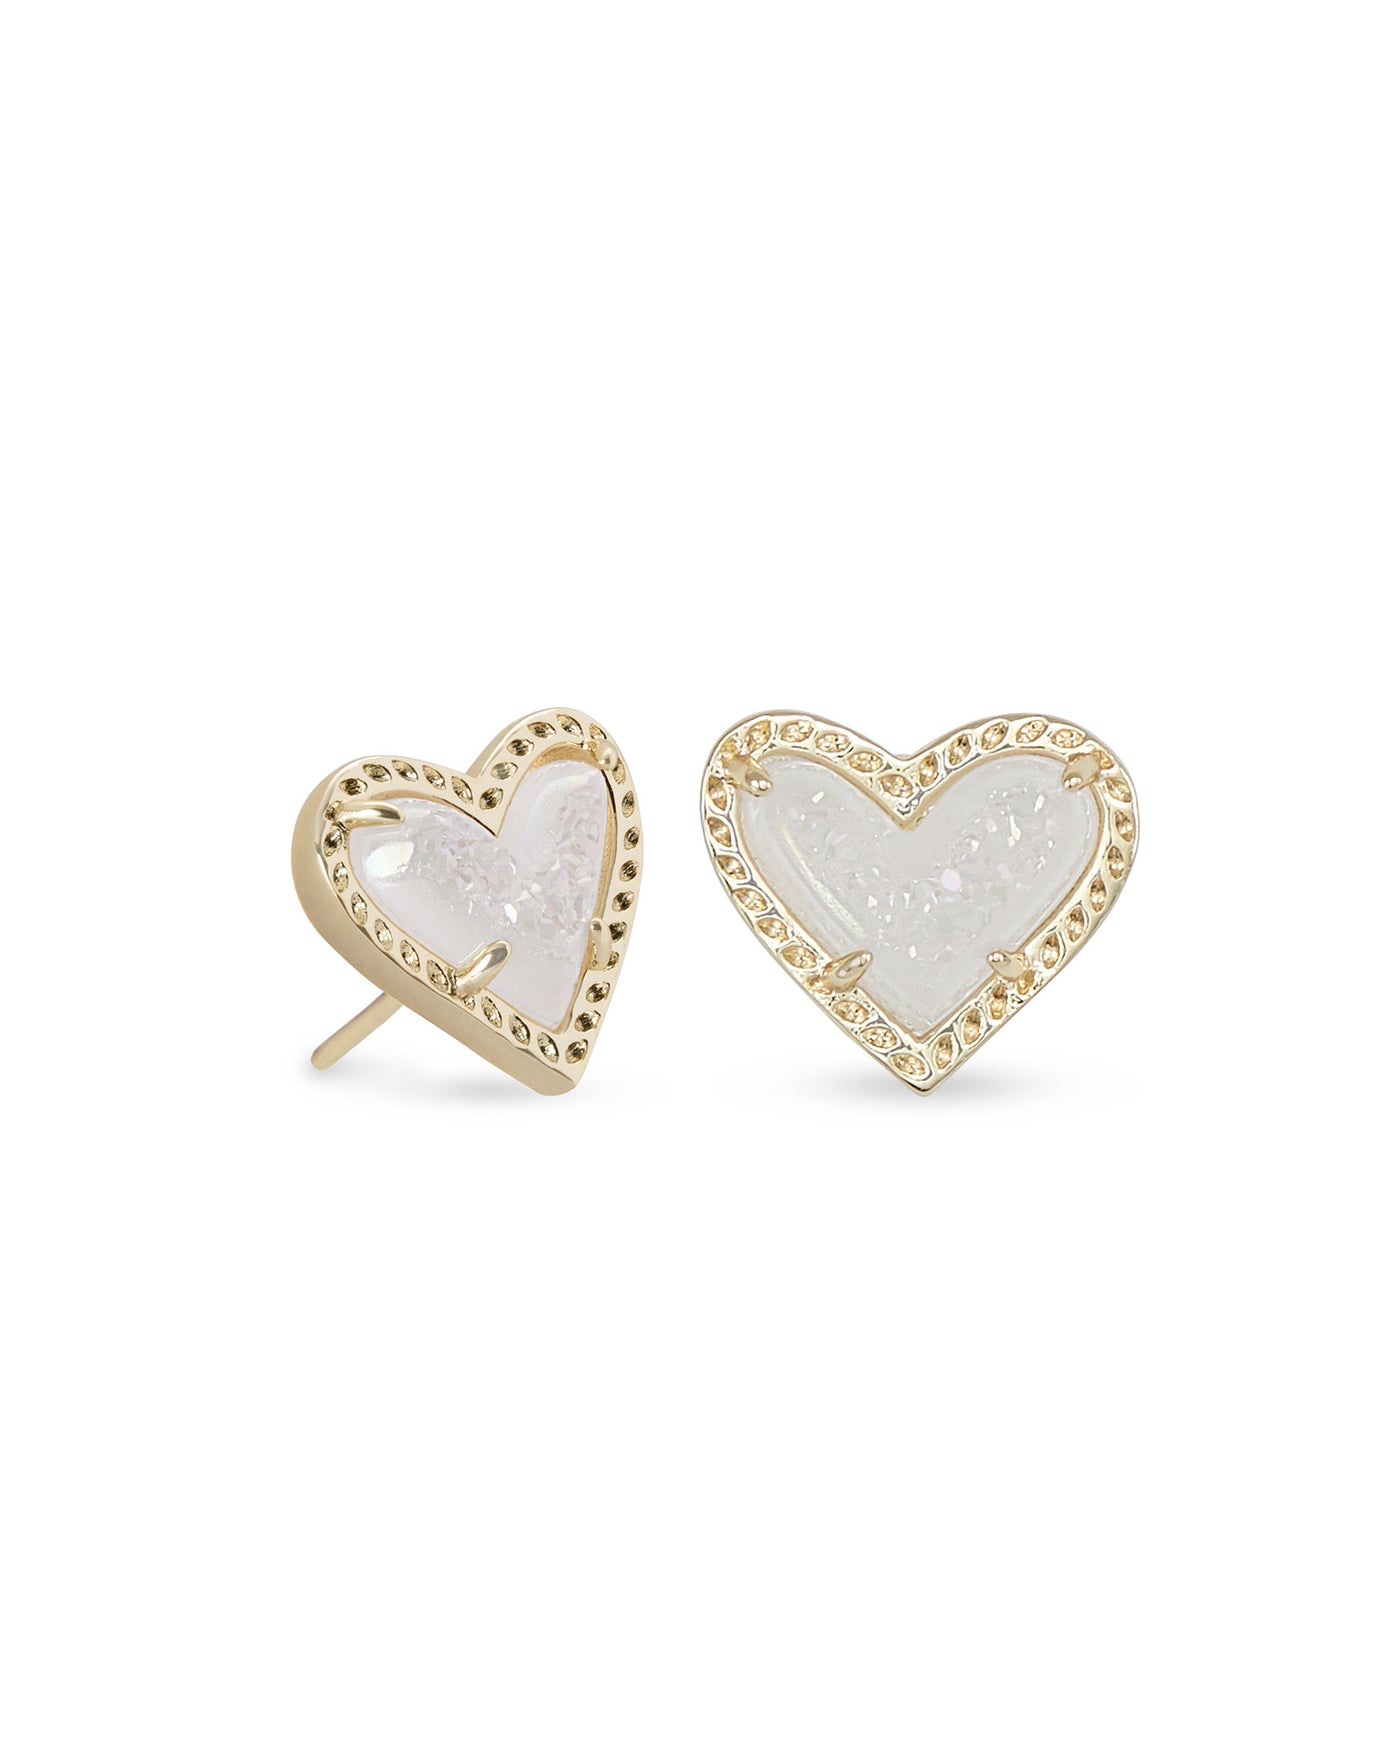 Kendra Scott Ari Heart Stud Earrings Gold Iridescent Drusy-Earrings-Kendra Scott-Market Street Nest, Fashionable Clothing, Shoes and Home Décor Located in Mabank, TX